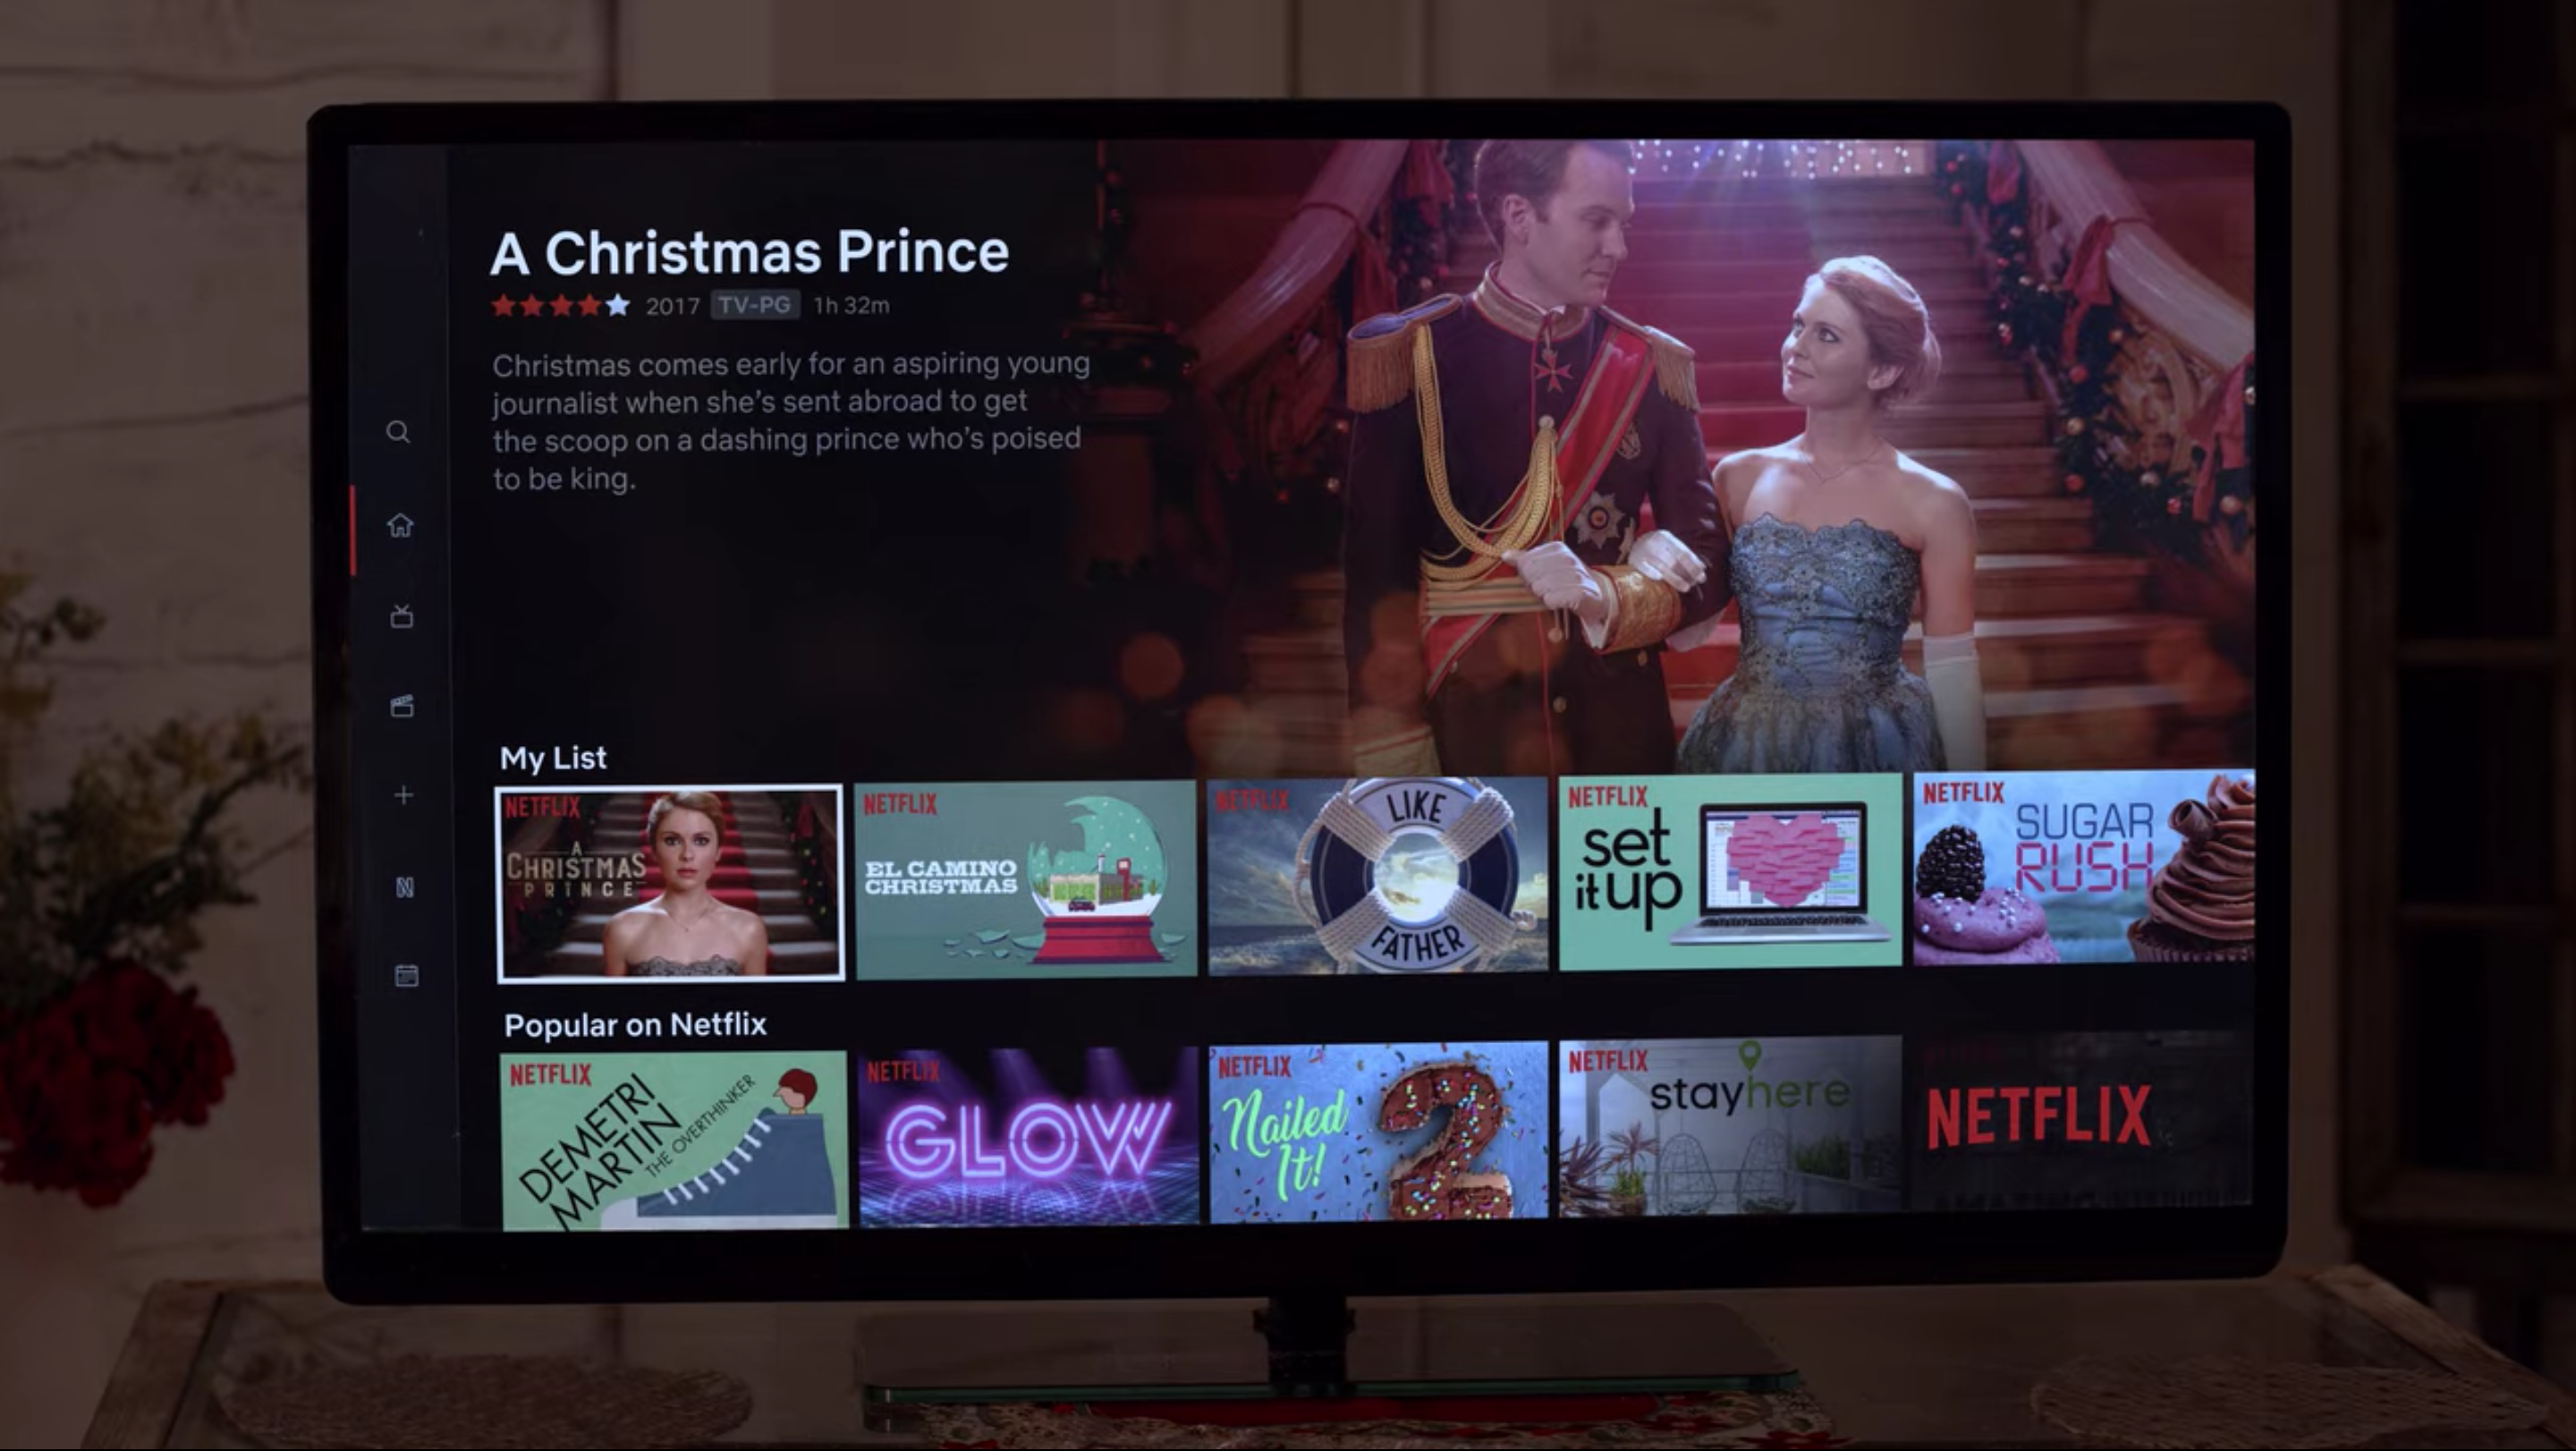 In ‘The Princess Switch’, Margaret and Kevin watched ‘A Christmas Prince’ together